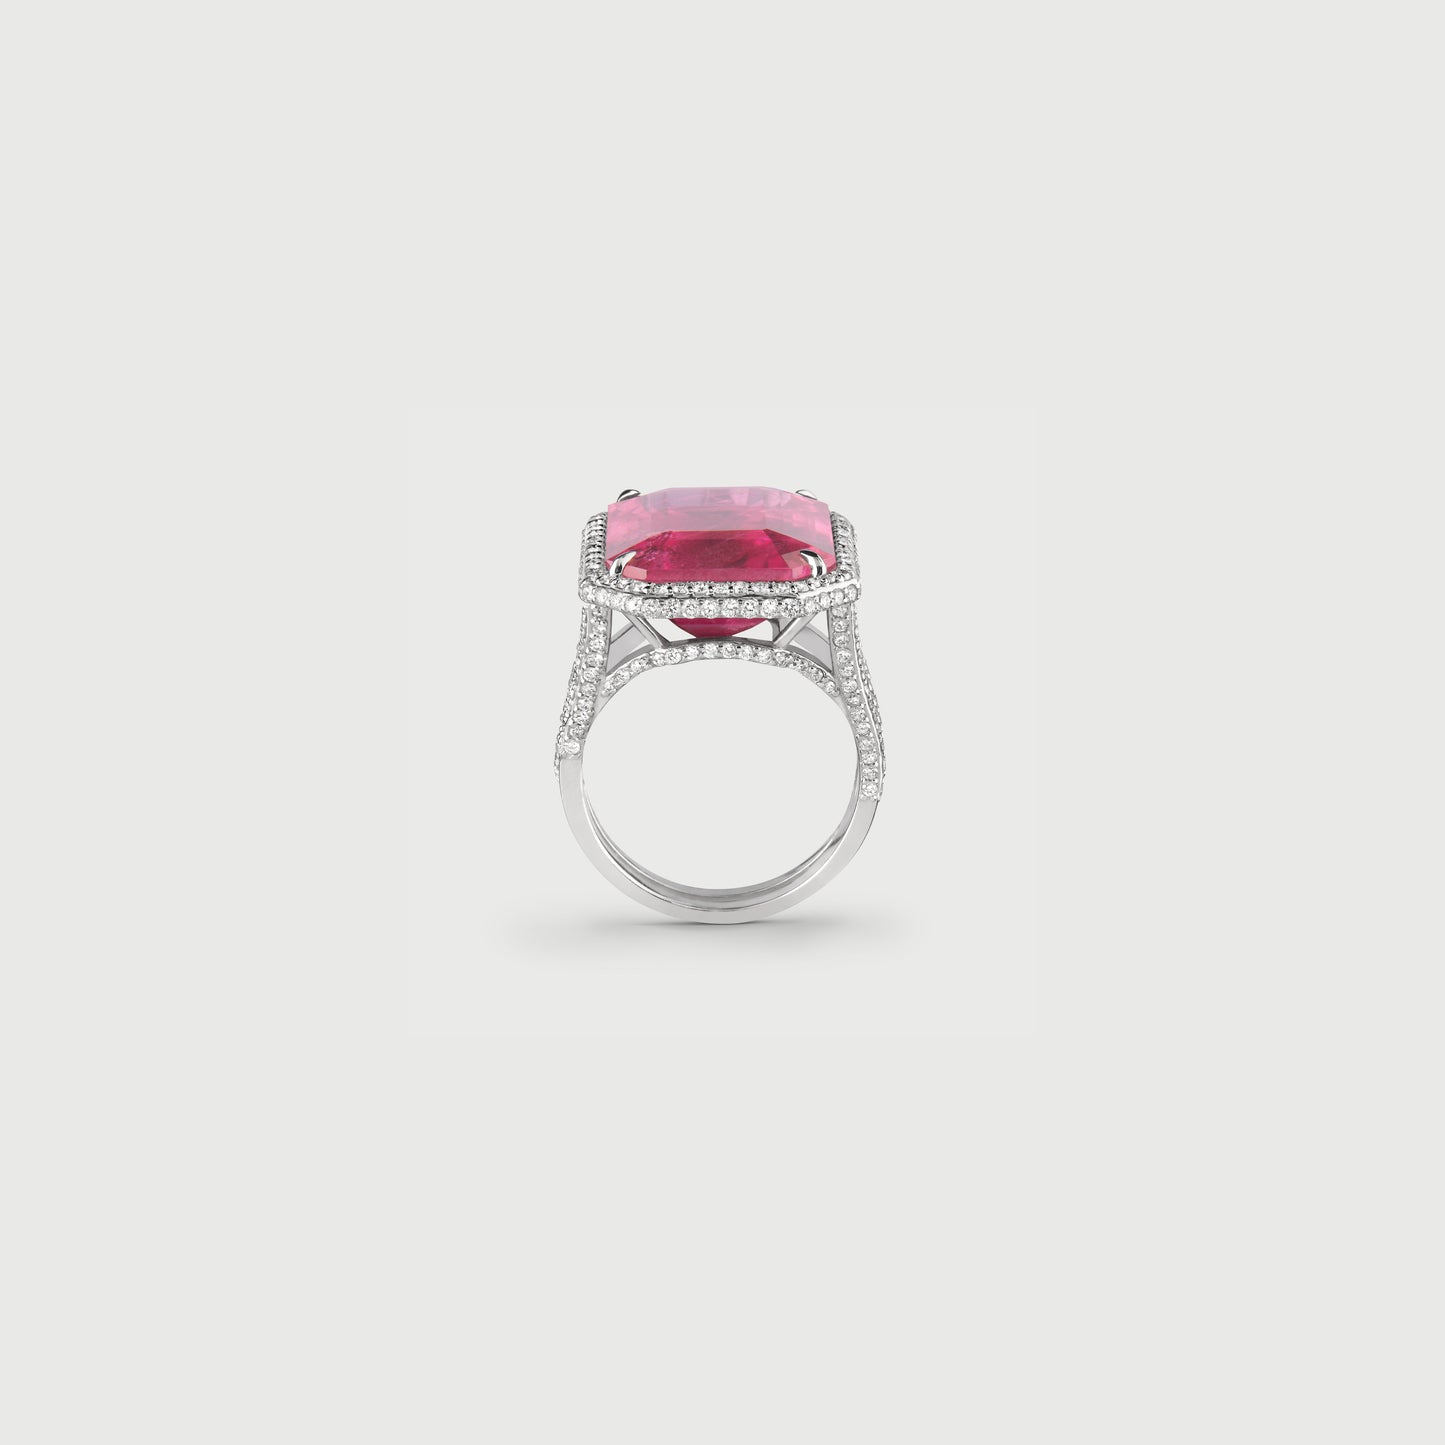 Rubellite and Diamond Cocktail Ring